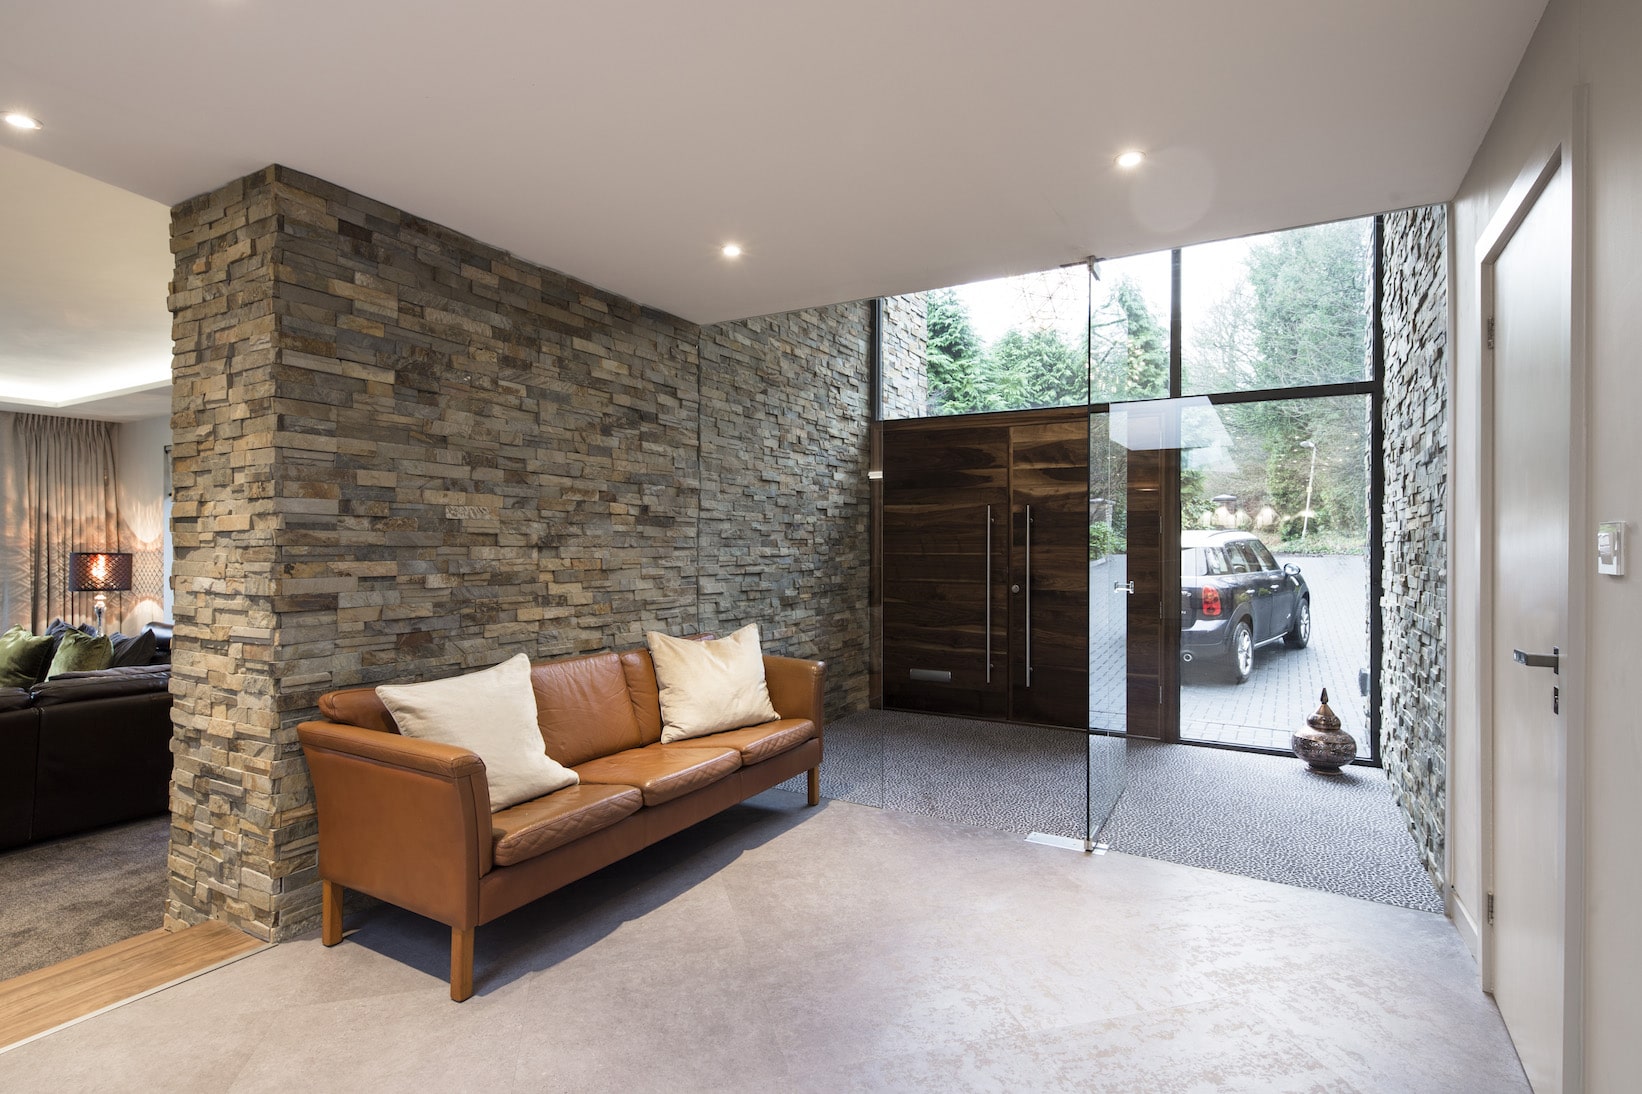 Norstone Ochre Slimline used on a residential project in the UK with both interior and exterior stone walls